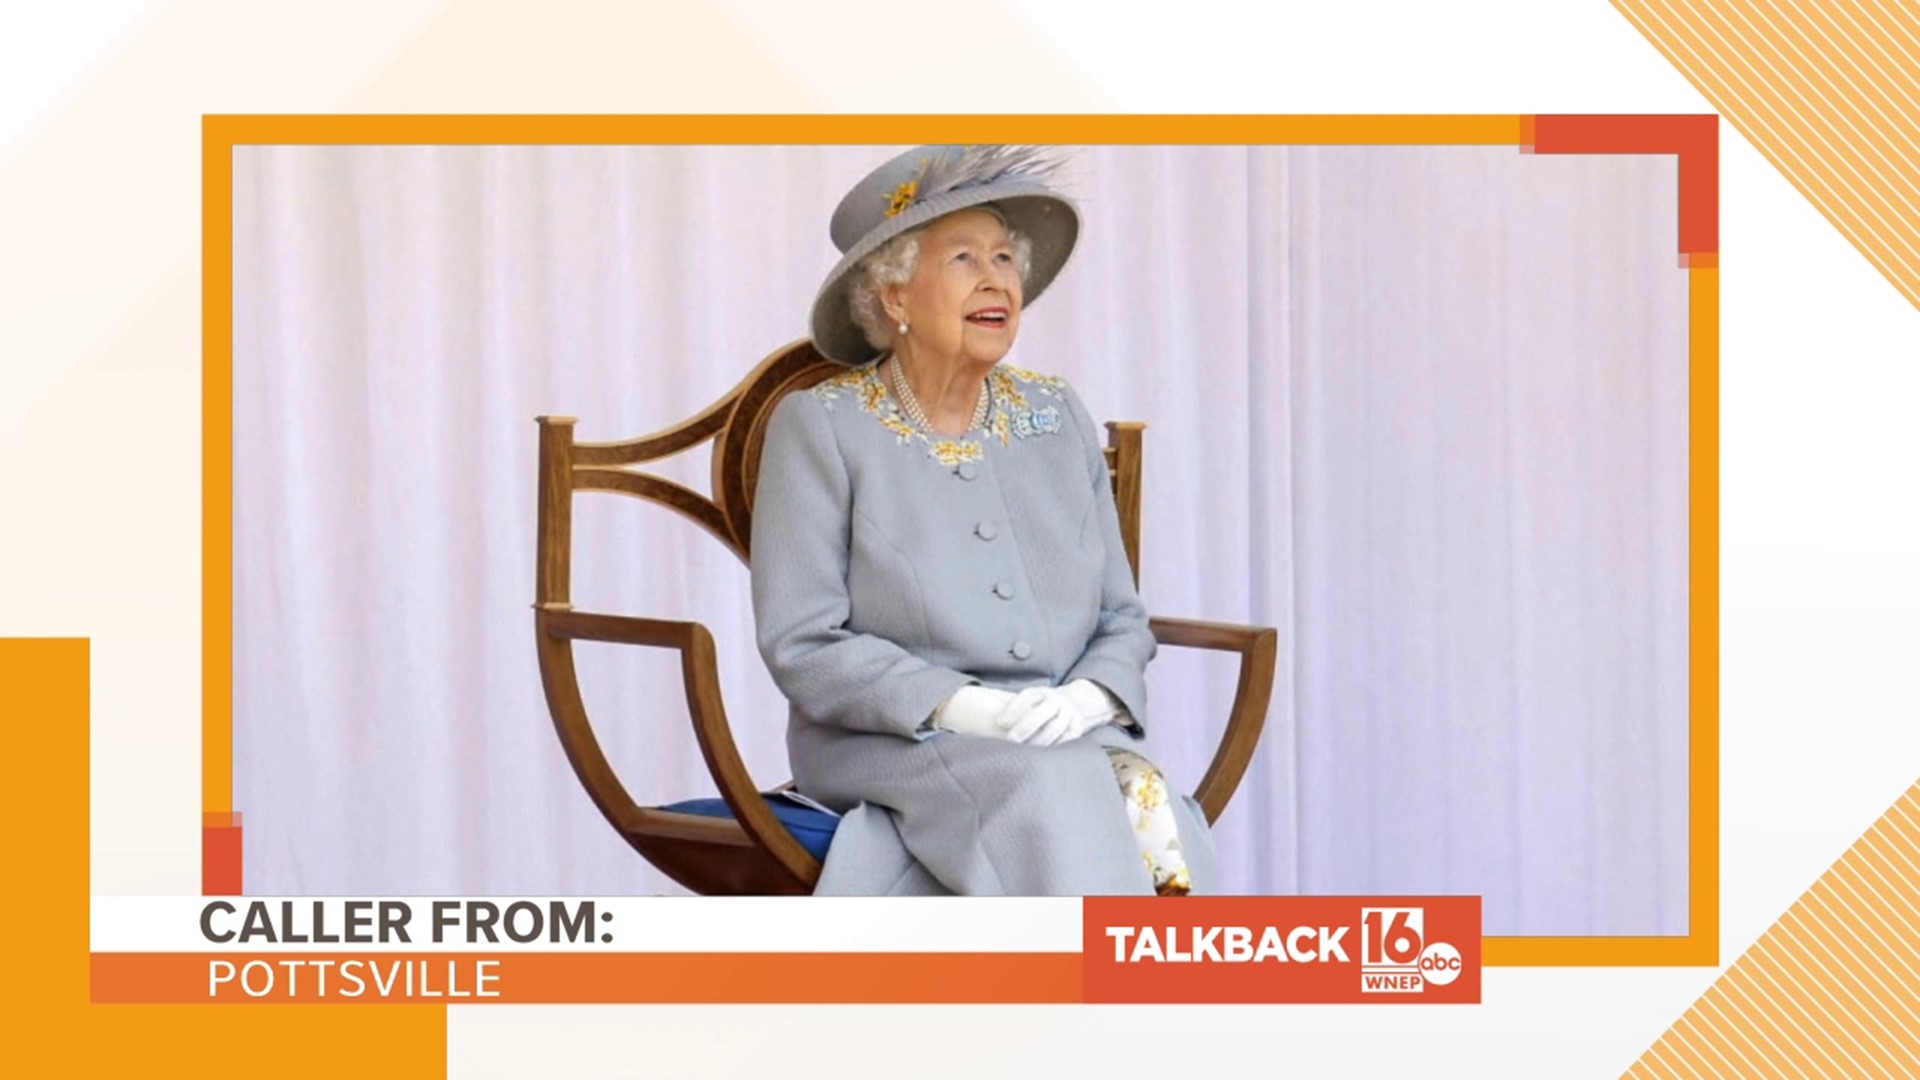 Callers are commenting on Queen Elizabeth II's passing.